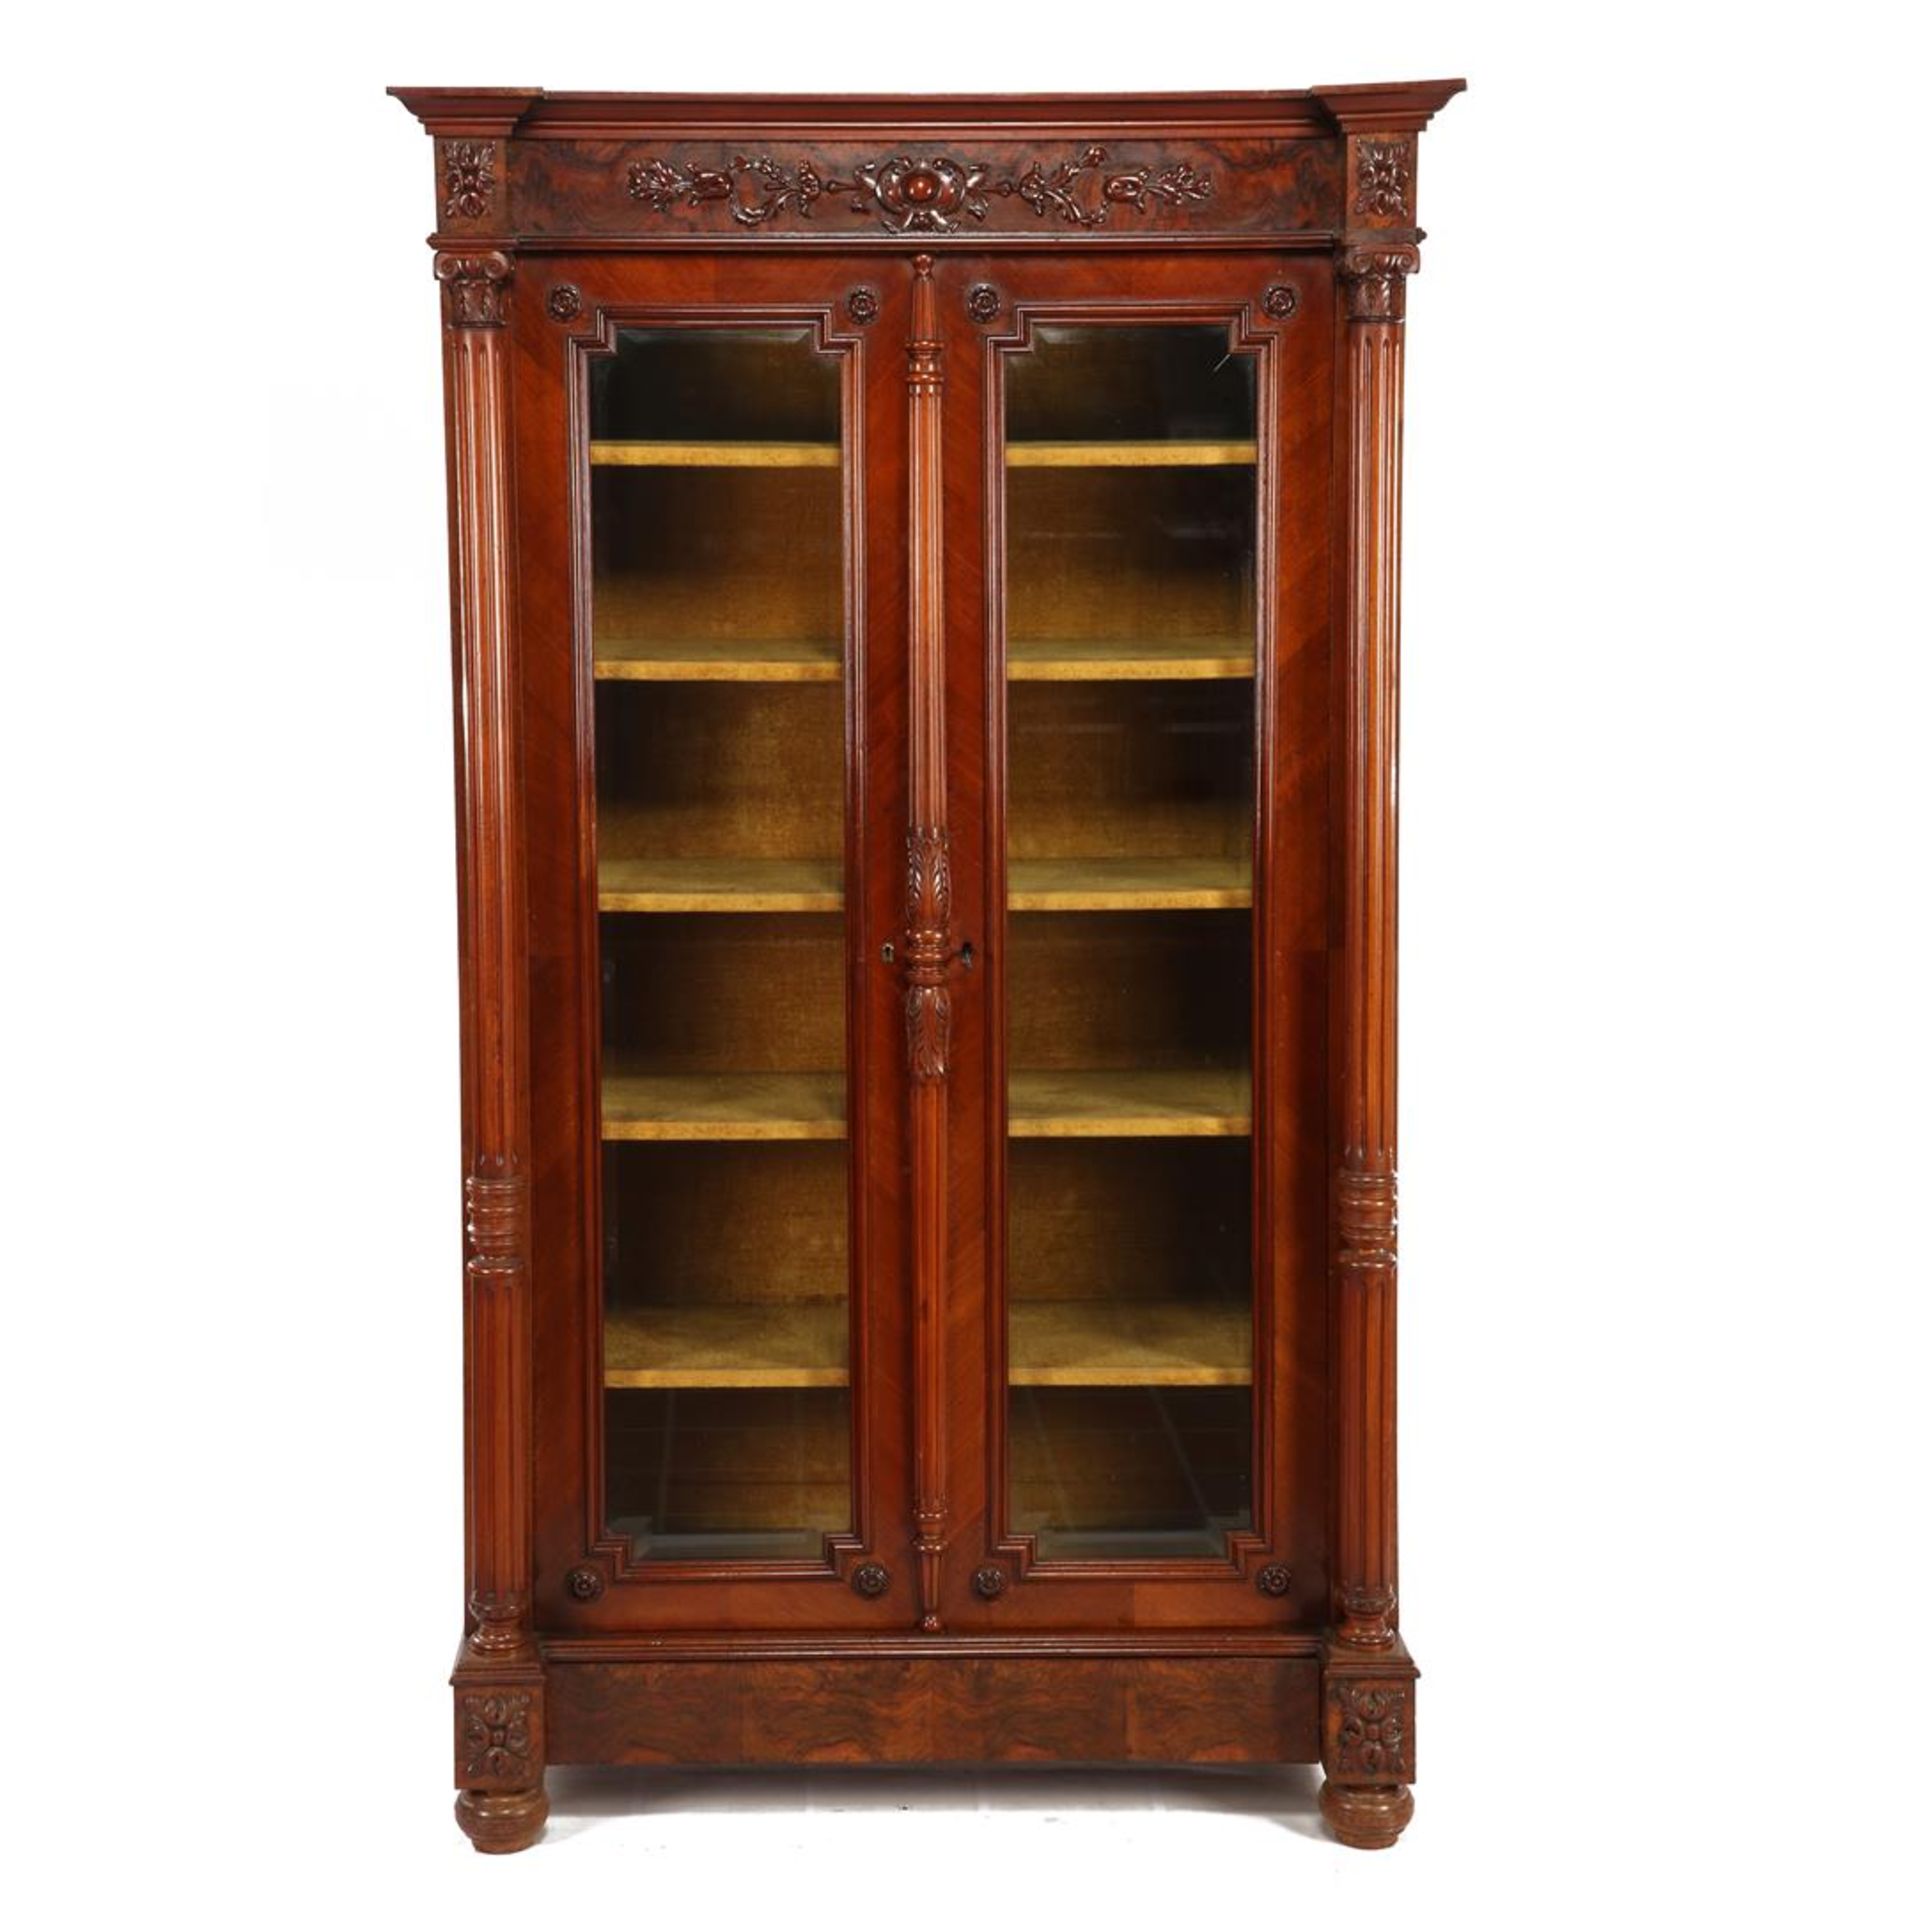 Walnut 2-door display cabinet with drawer, full columns, ornaments, facet cut glass in doors and